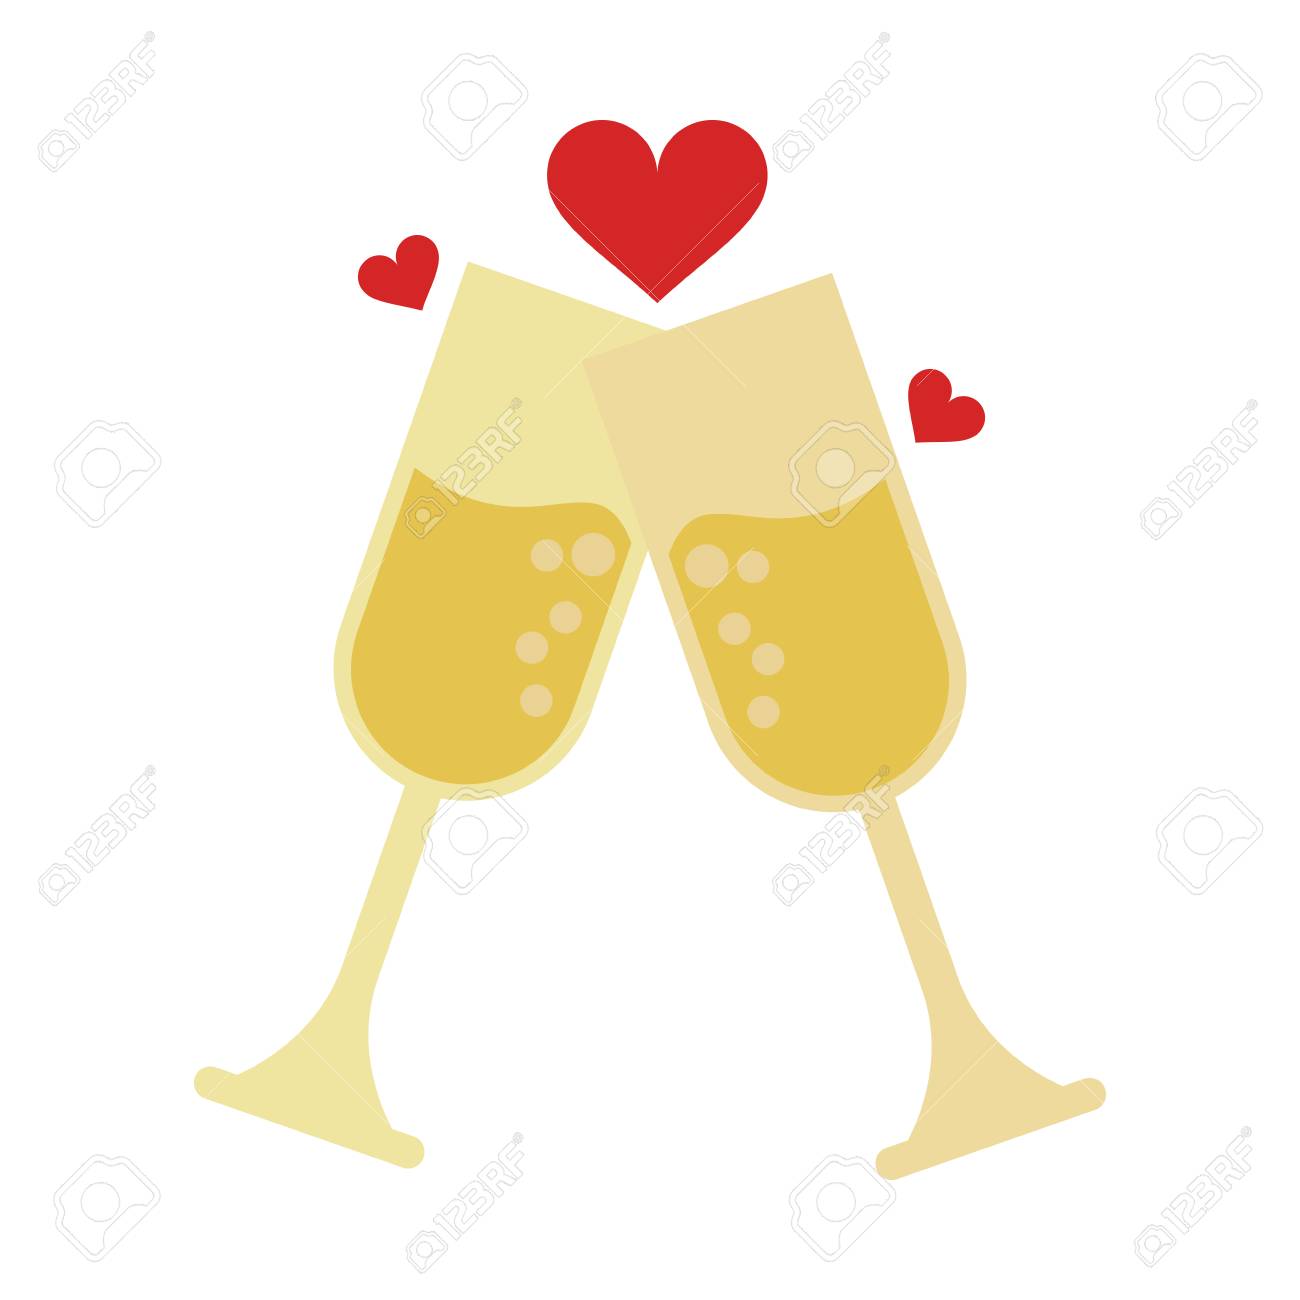 A champagne glasses toasting with hearts wedding related icon...